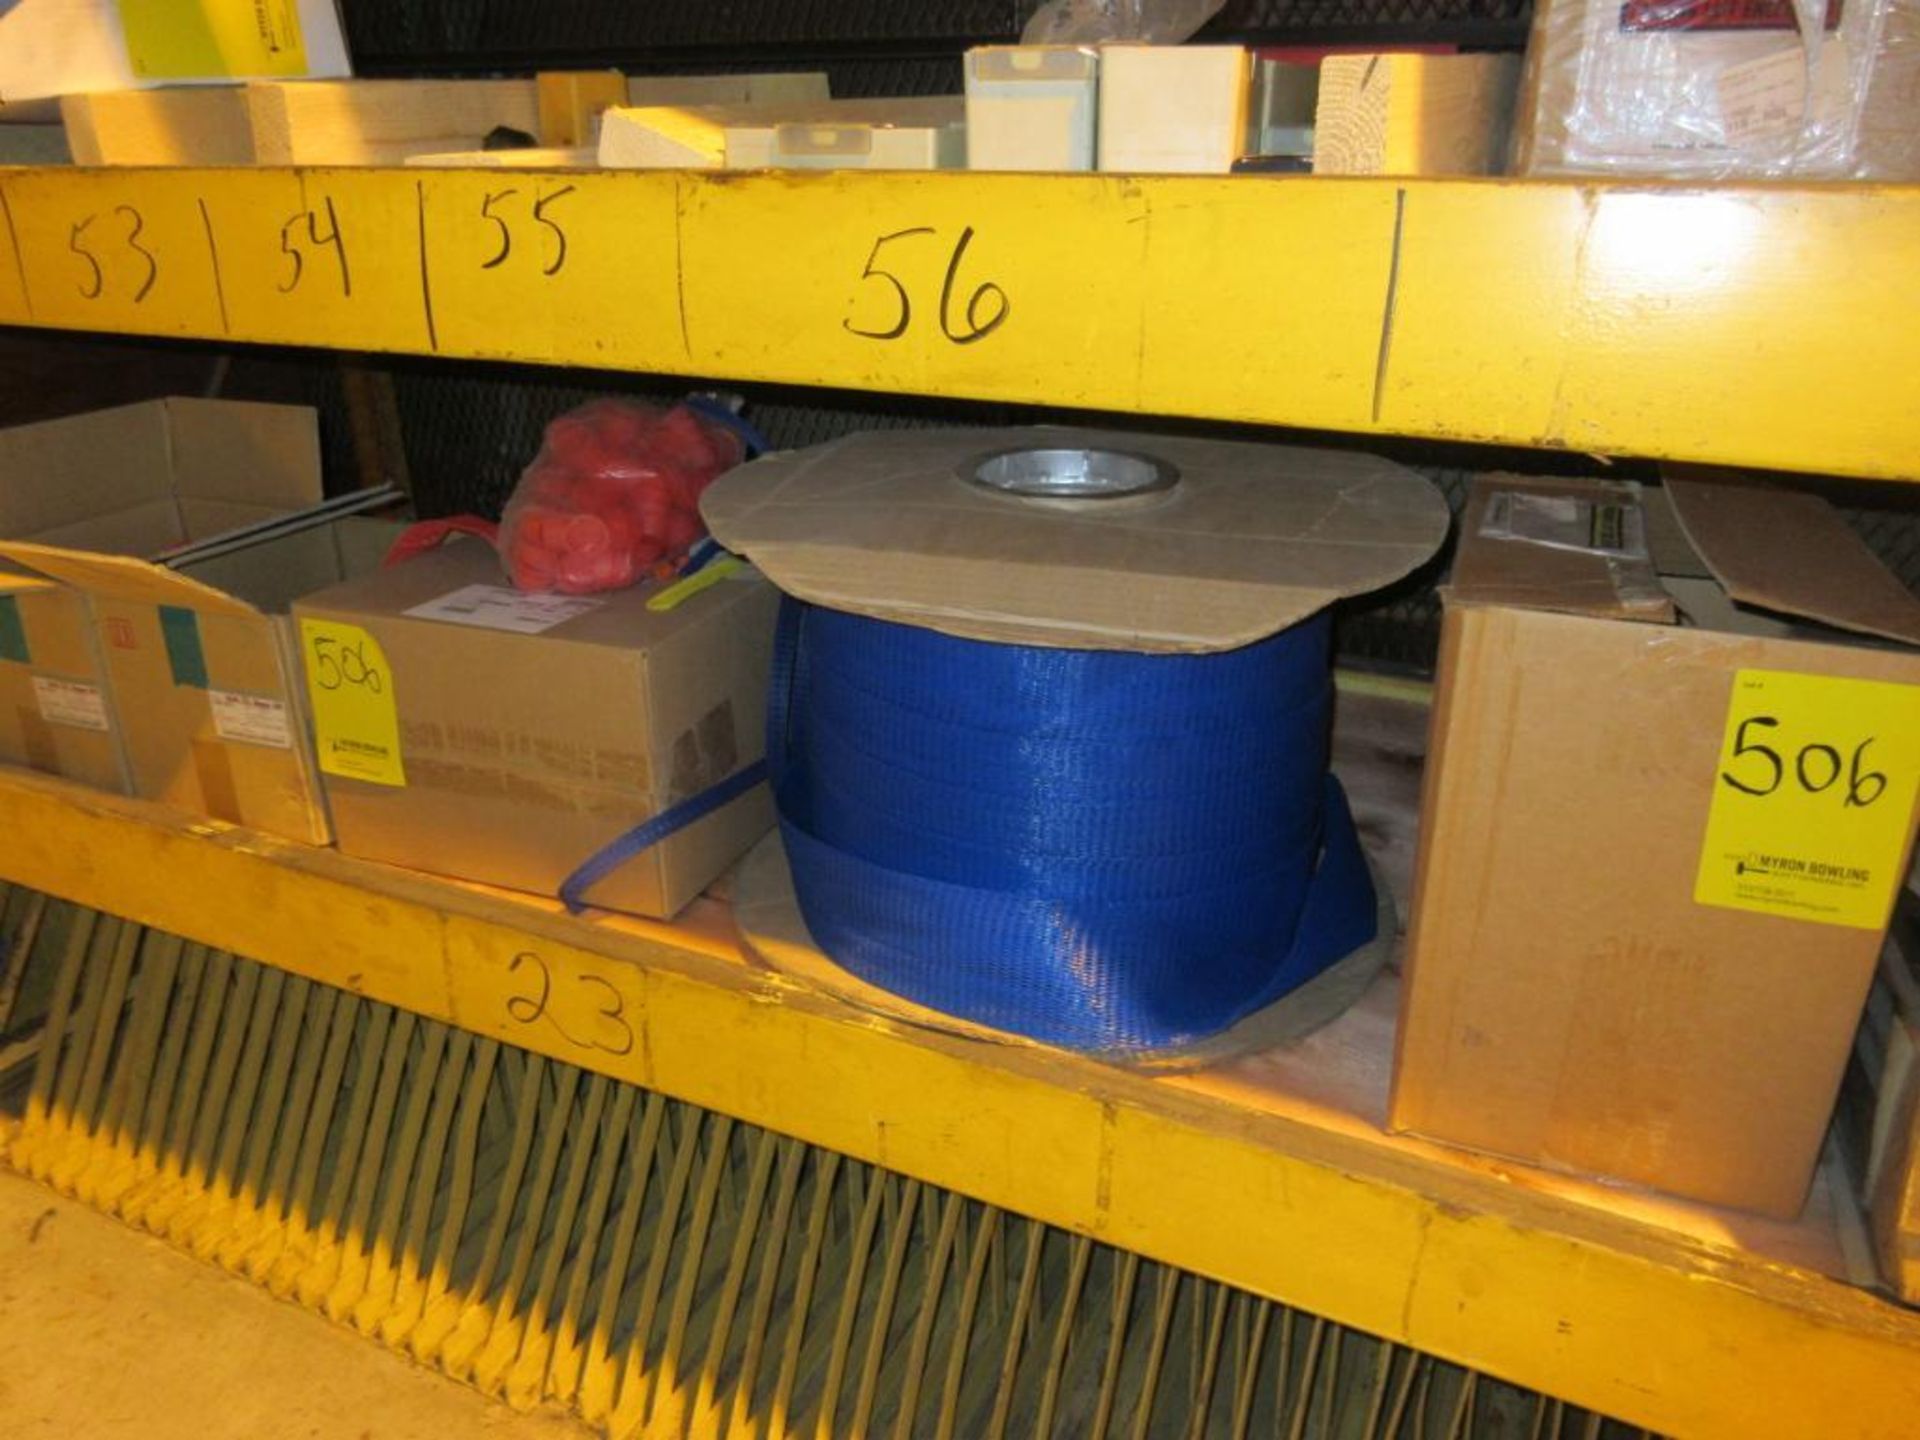 CONTENTS OF (22) SECTIONS PALLET RACK: ASSORTED ABRASIVES, SUNNEN STONES, TOOL BITS, DOVETAIL CUTTER - Image 15 of 43